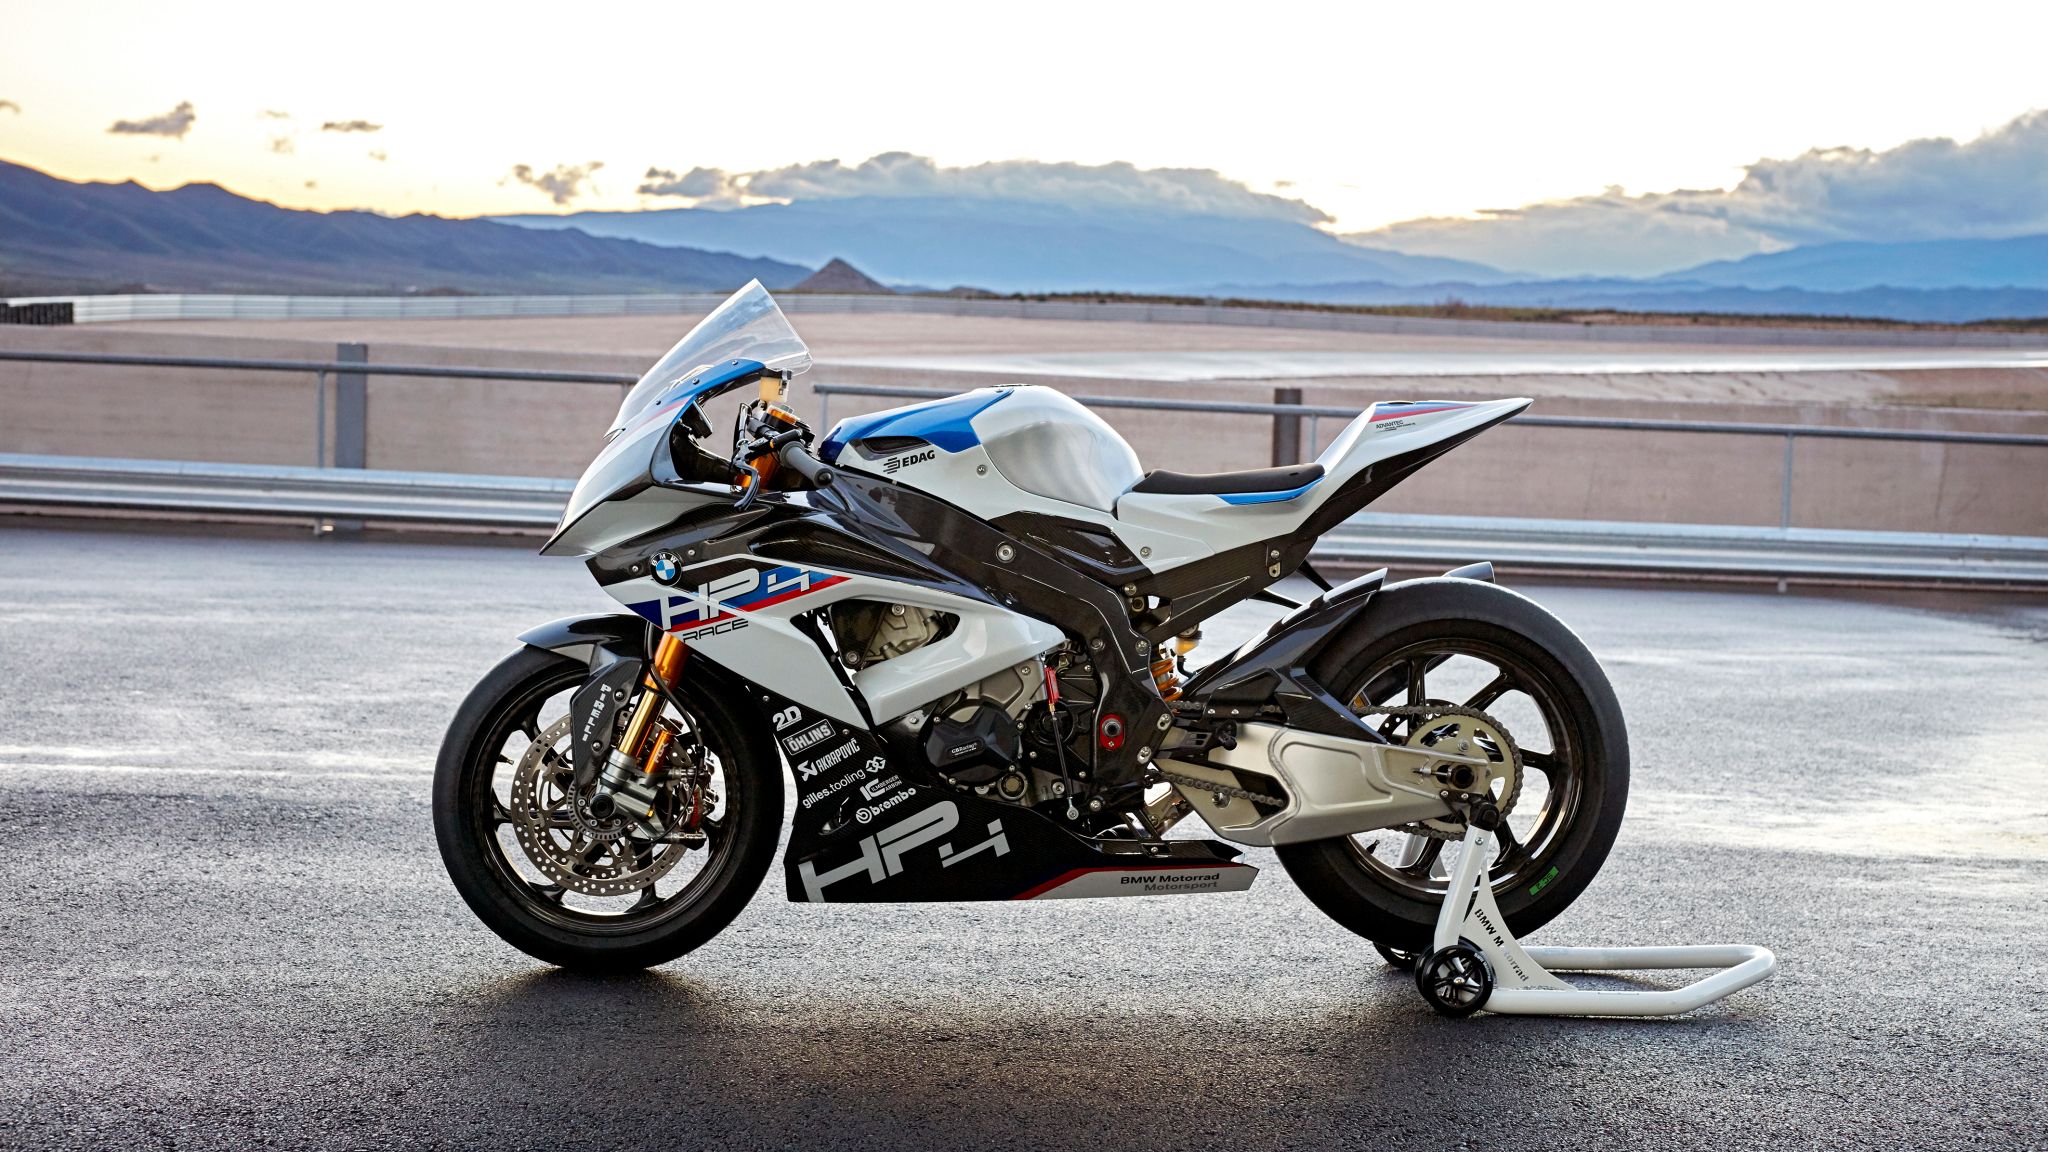 The mighty BMW HP4's engine lasts only for 3100 miles. 